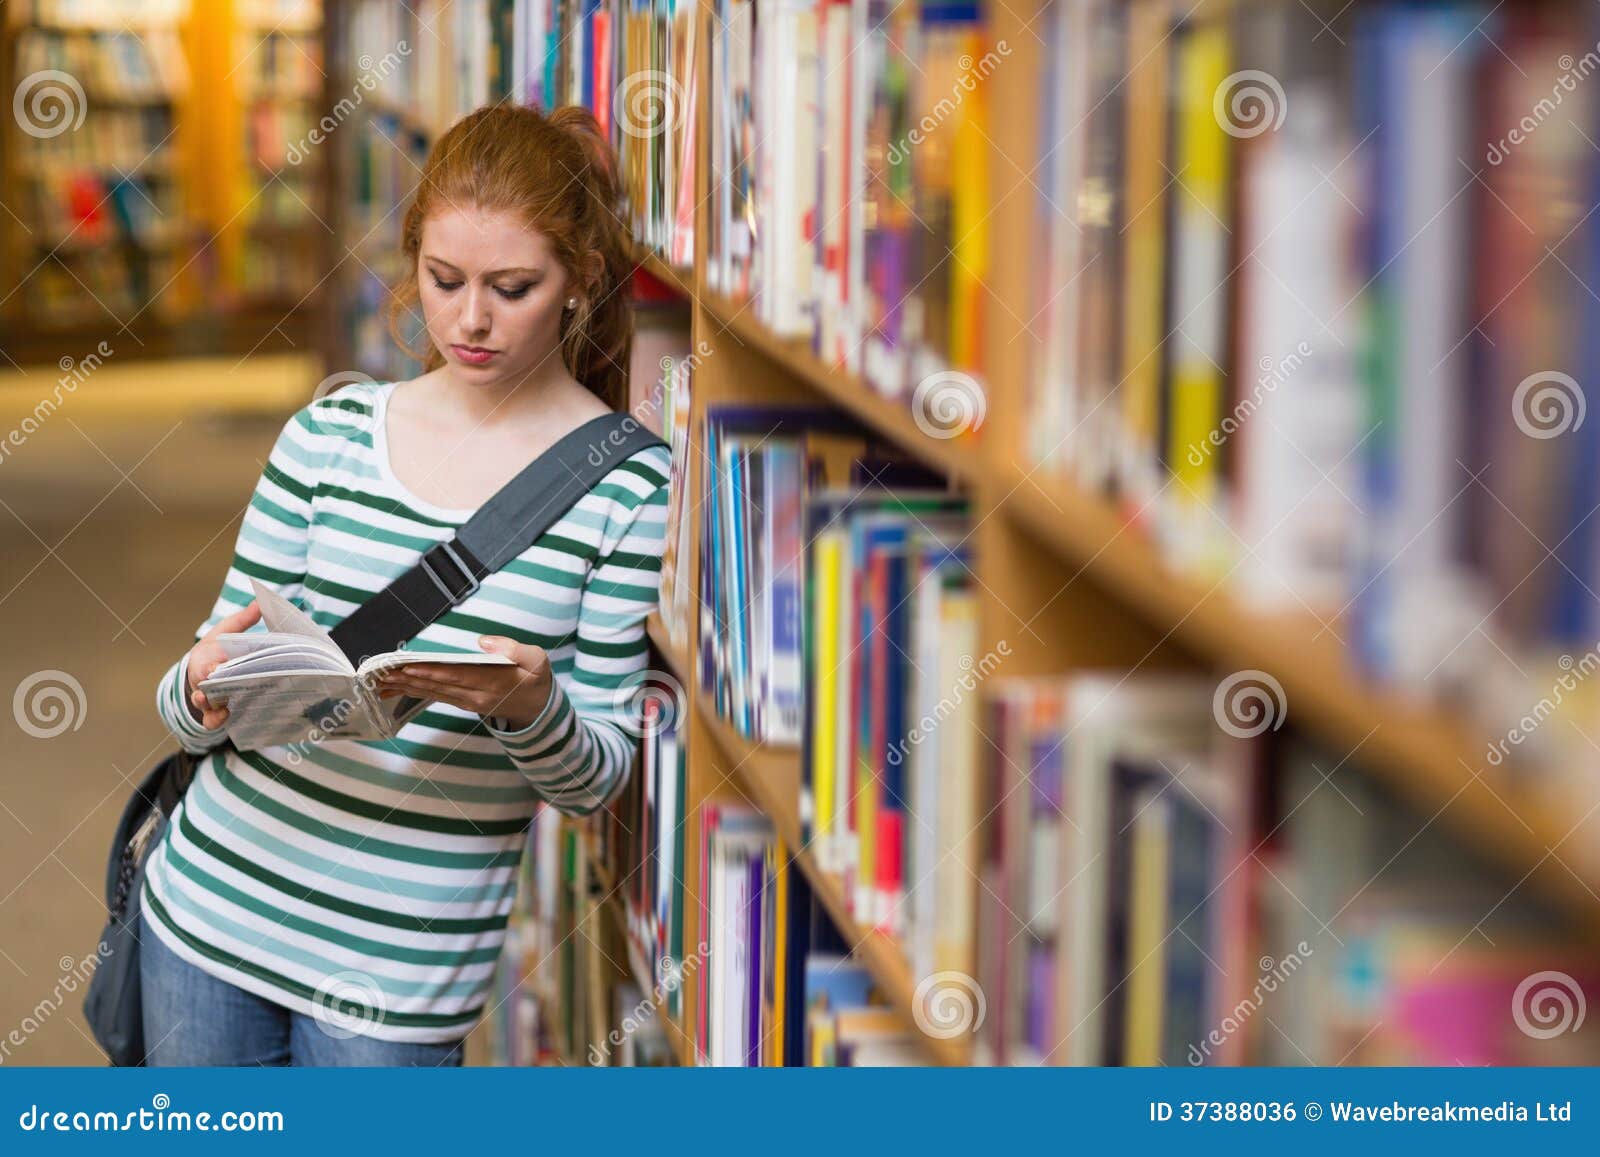 redhead student reading book leaning on shelf in library